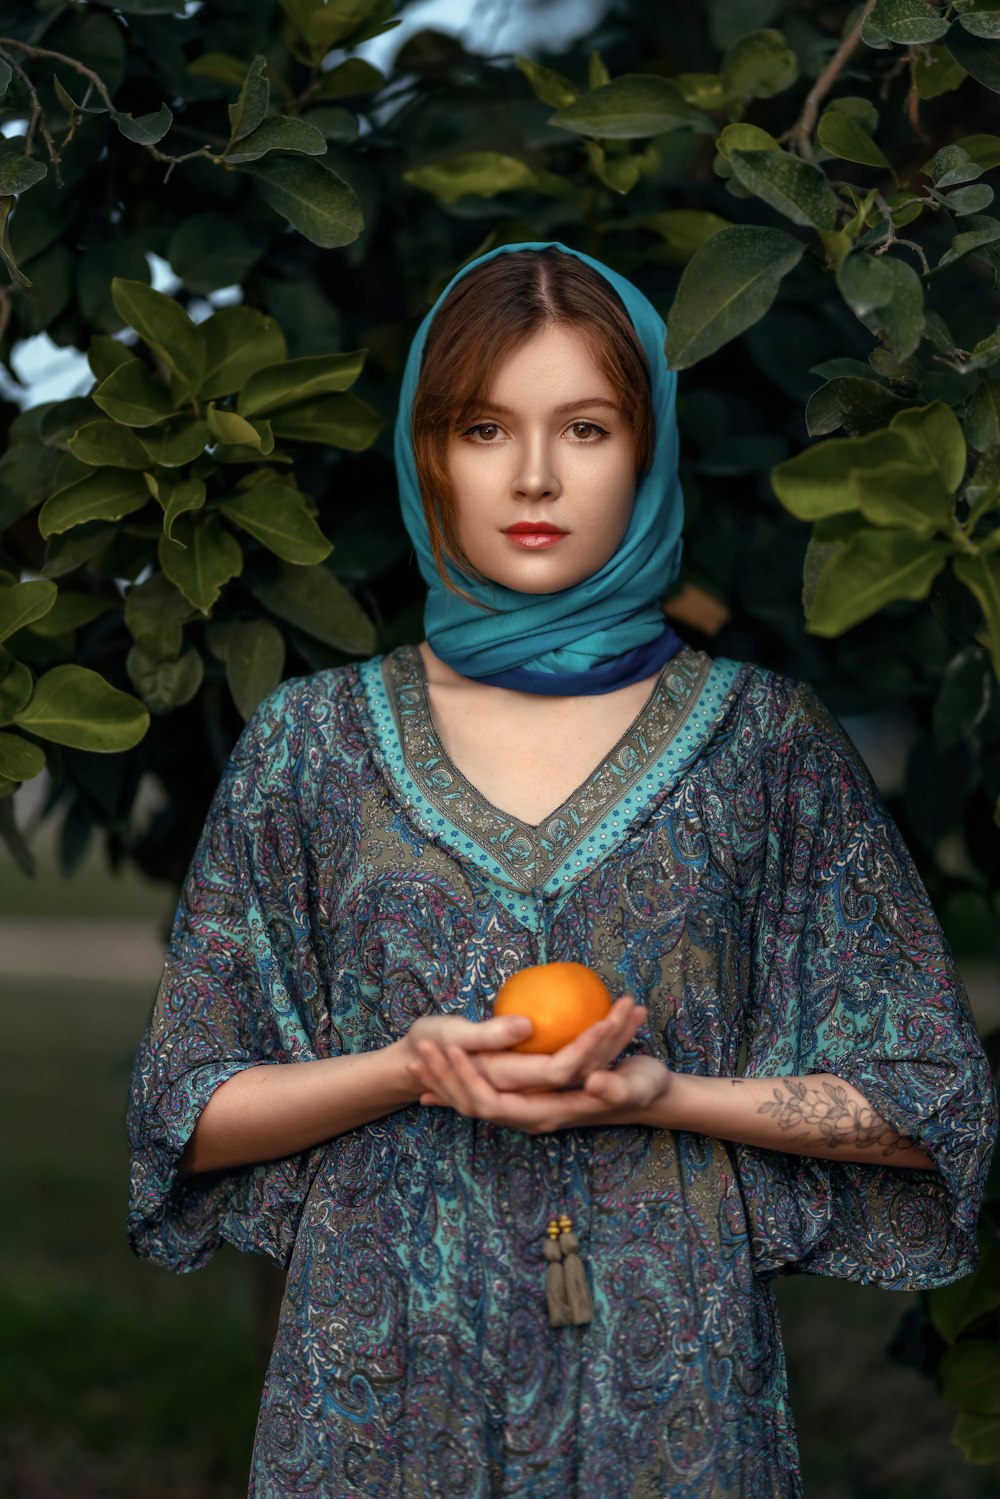 a woman holding an orange in her hands